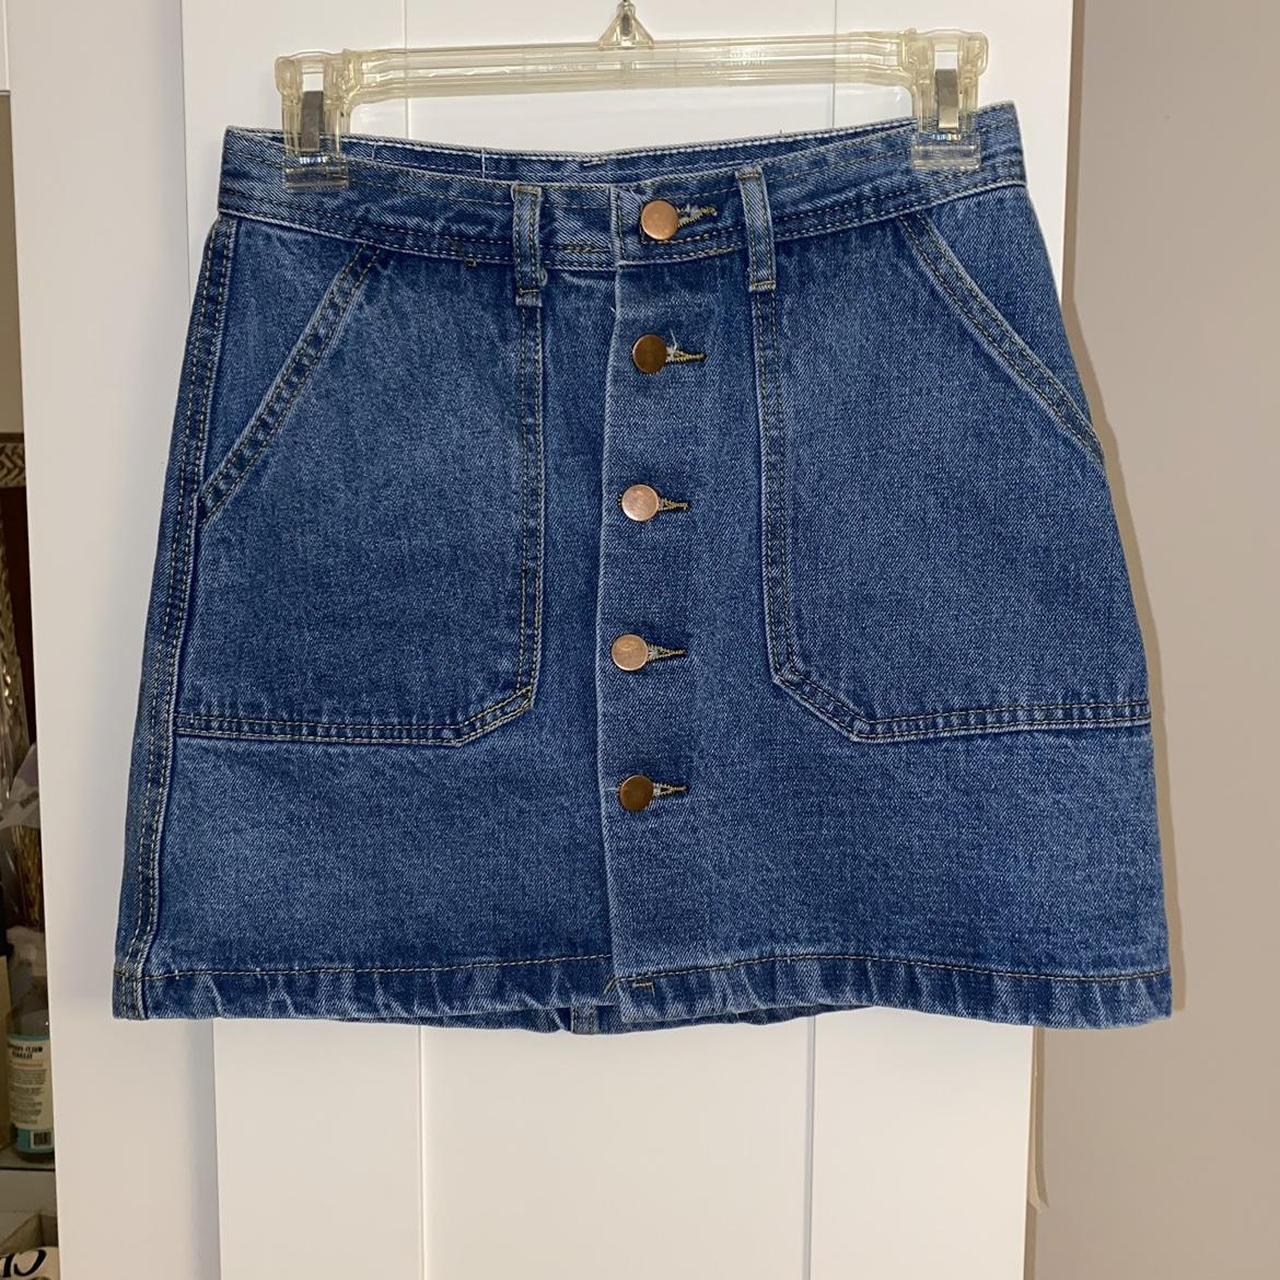 Button Down Denim/ Jean Skirt A-Line style with... - Depop